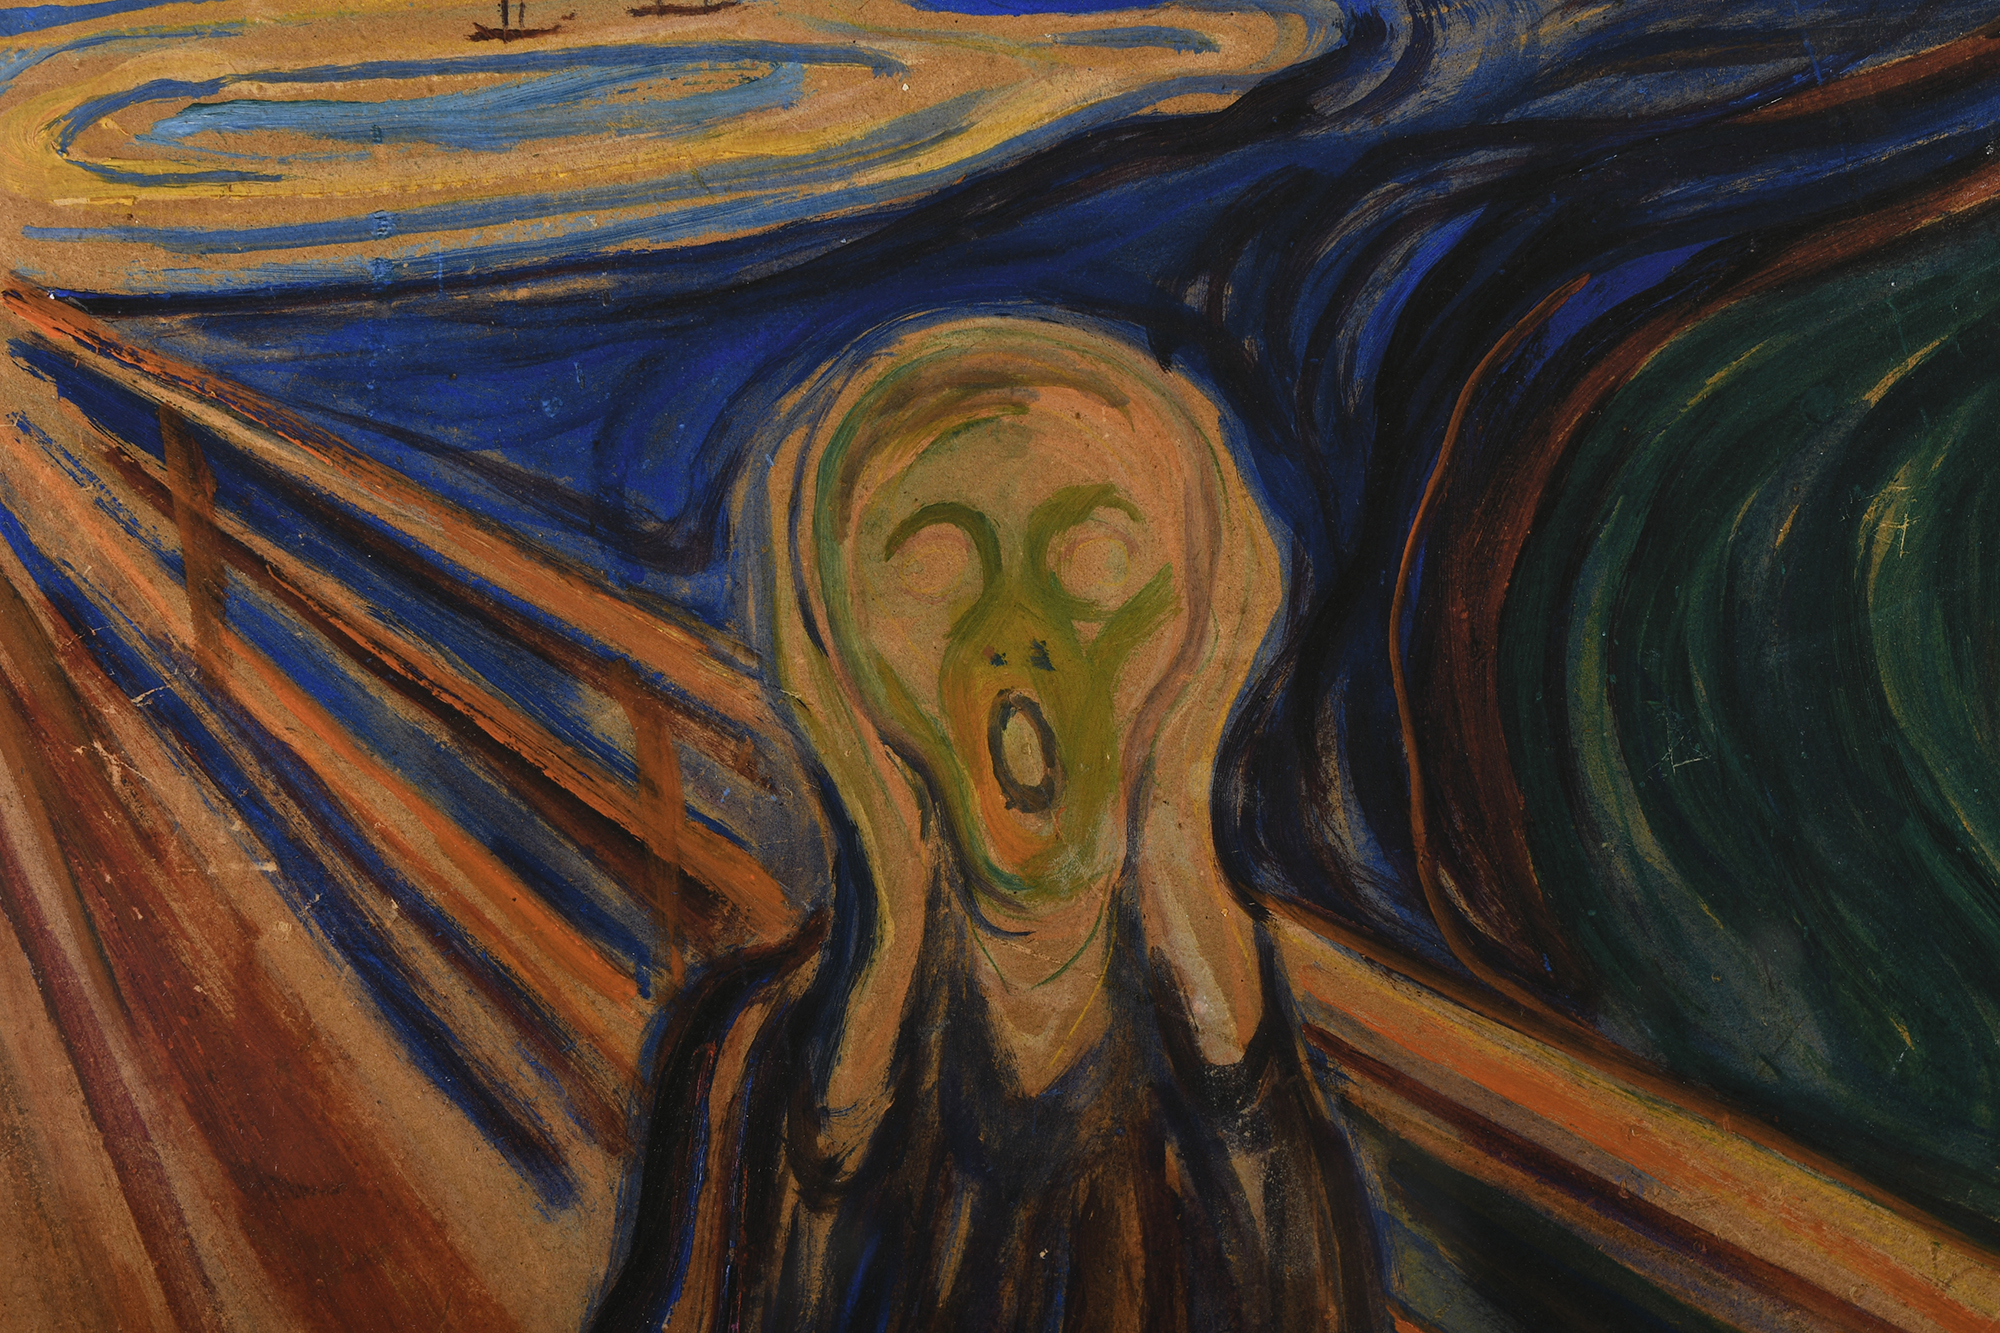 Rare Limited Edition Edvard Munch ""The Scream"" - Image 5 of 8